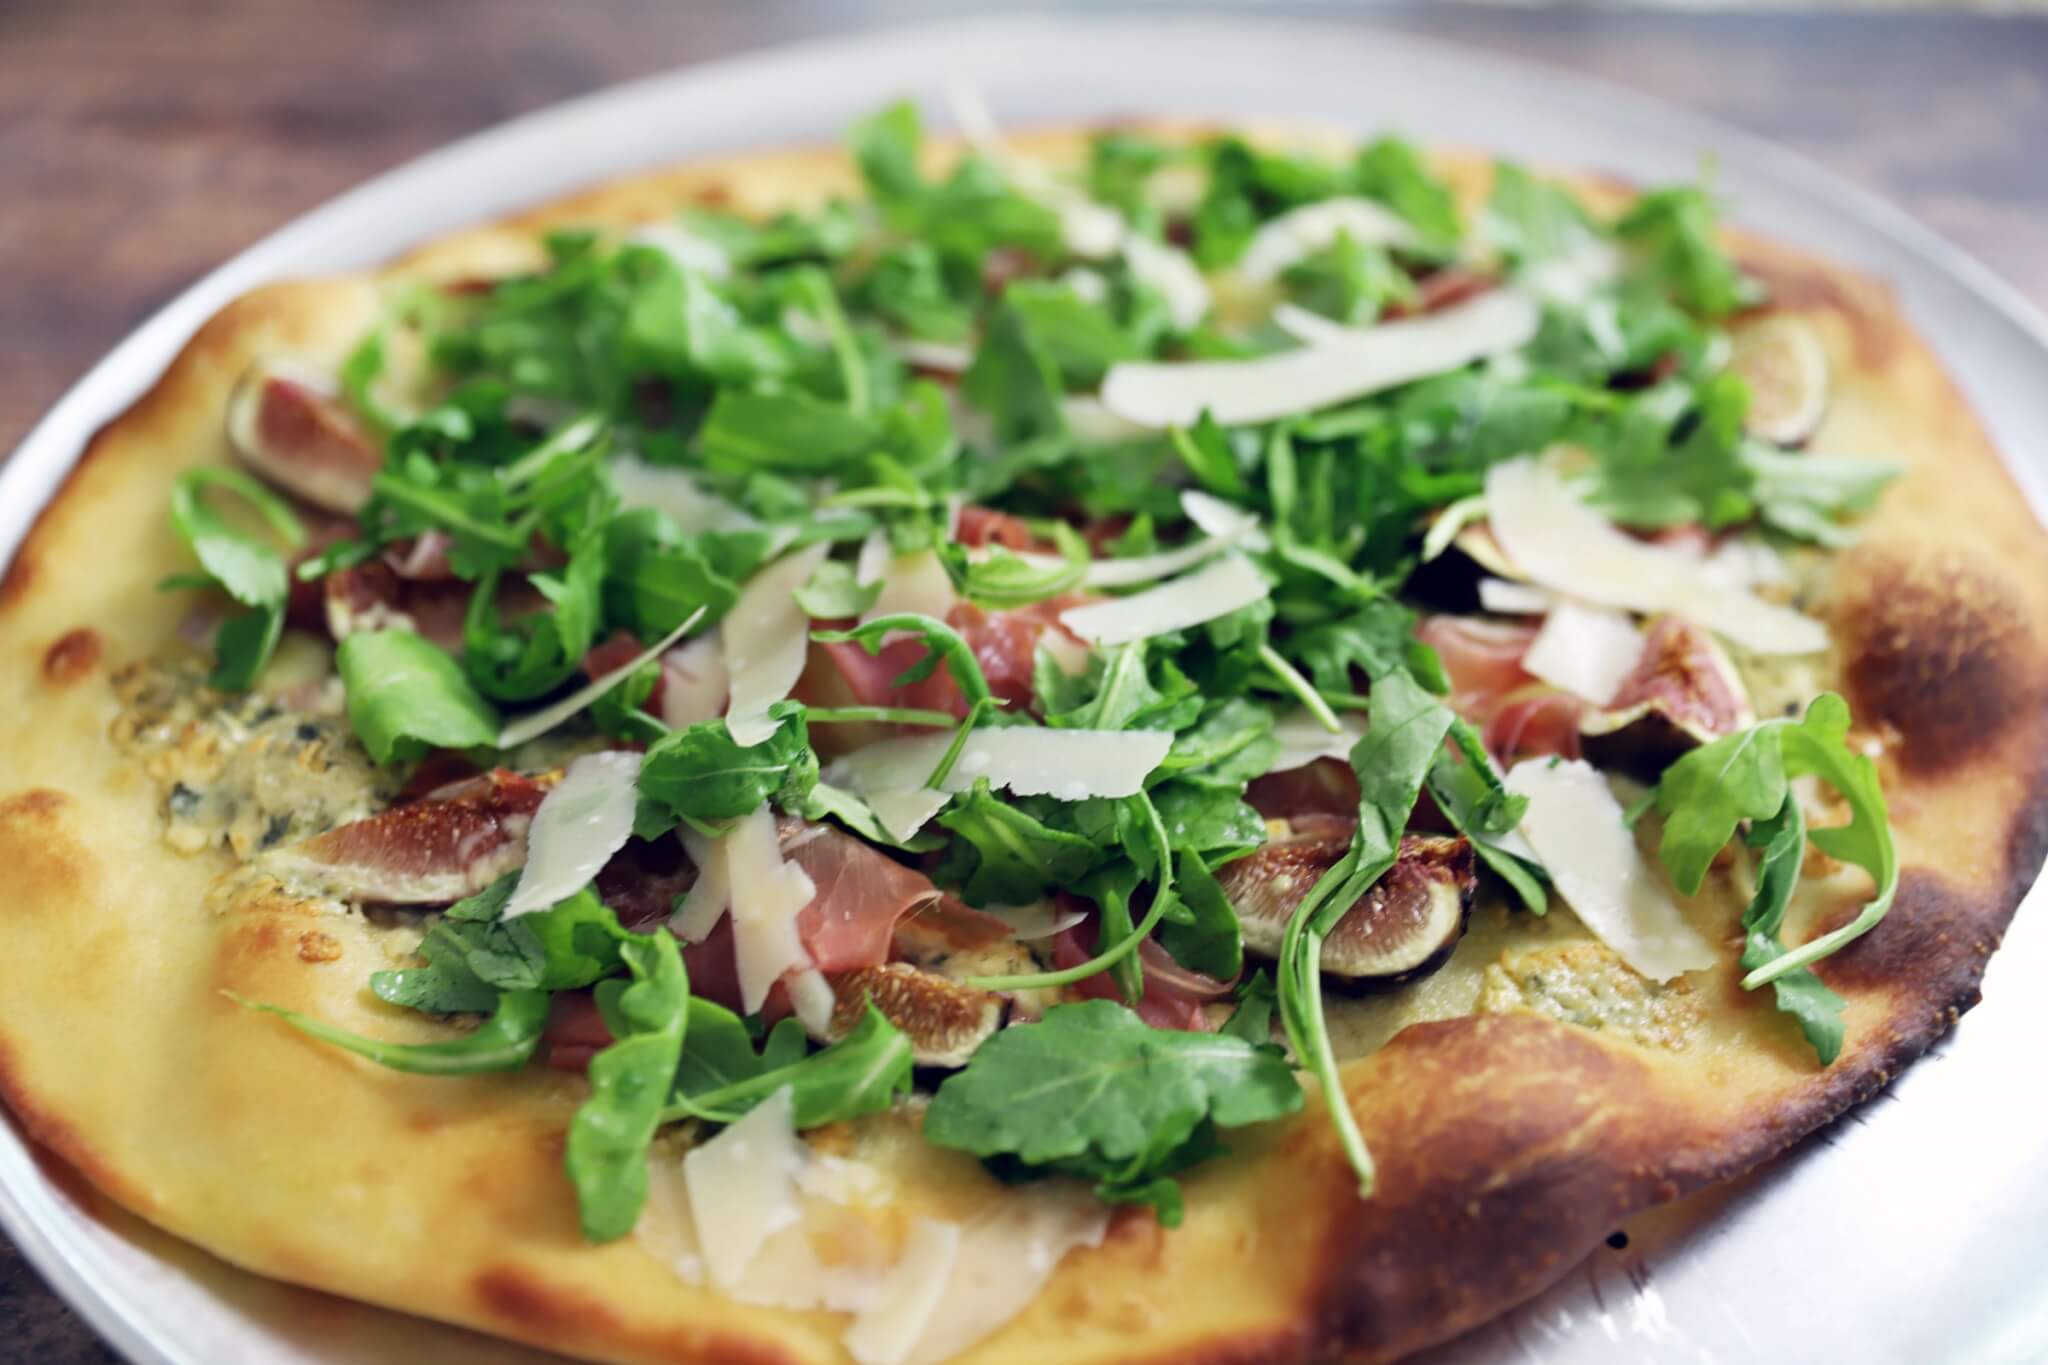 fig and prosciutto pizza with arugula salad and lemon vinaigrette, topped with shaved parmesan cheese